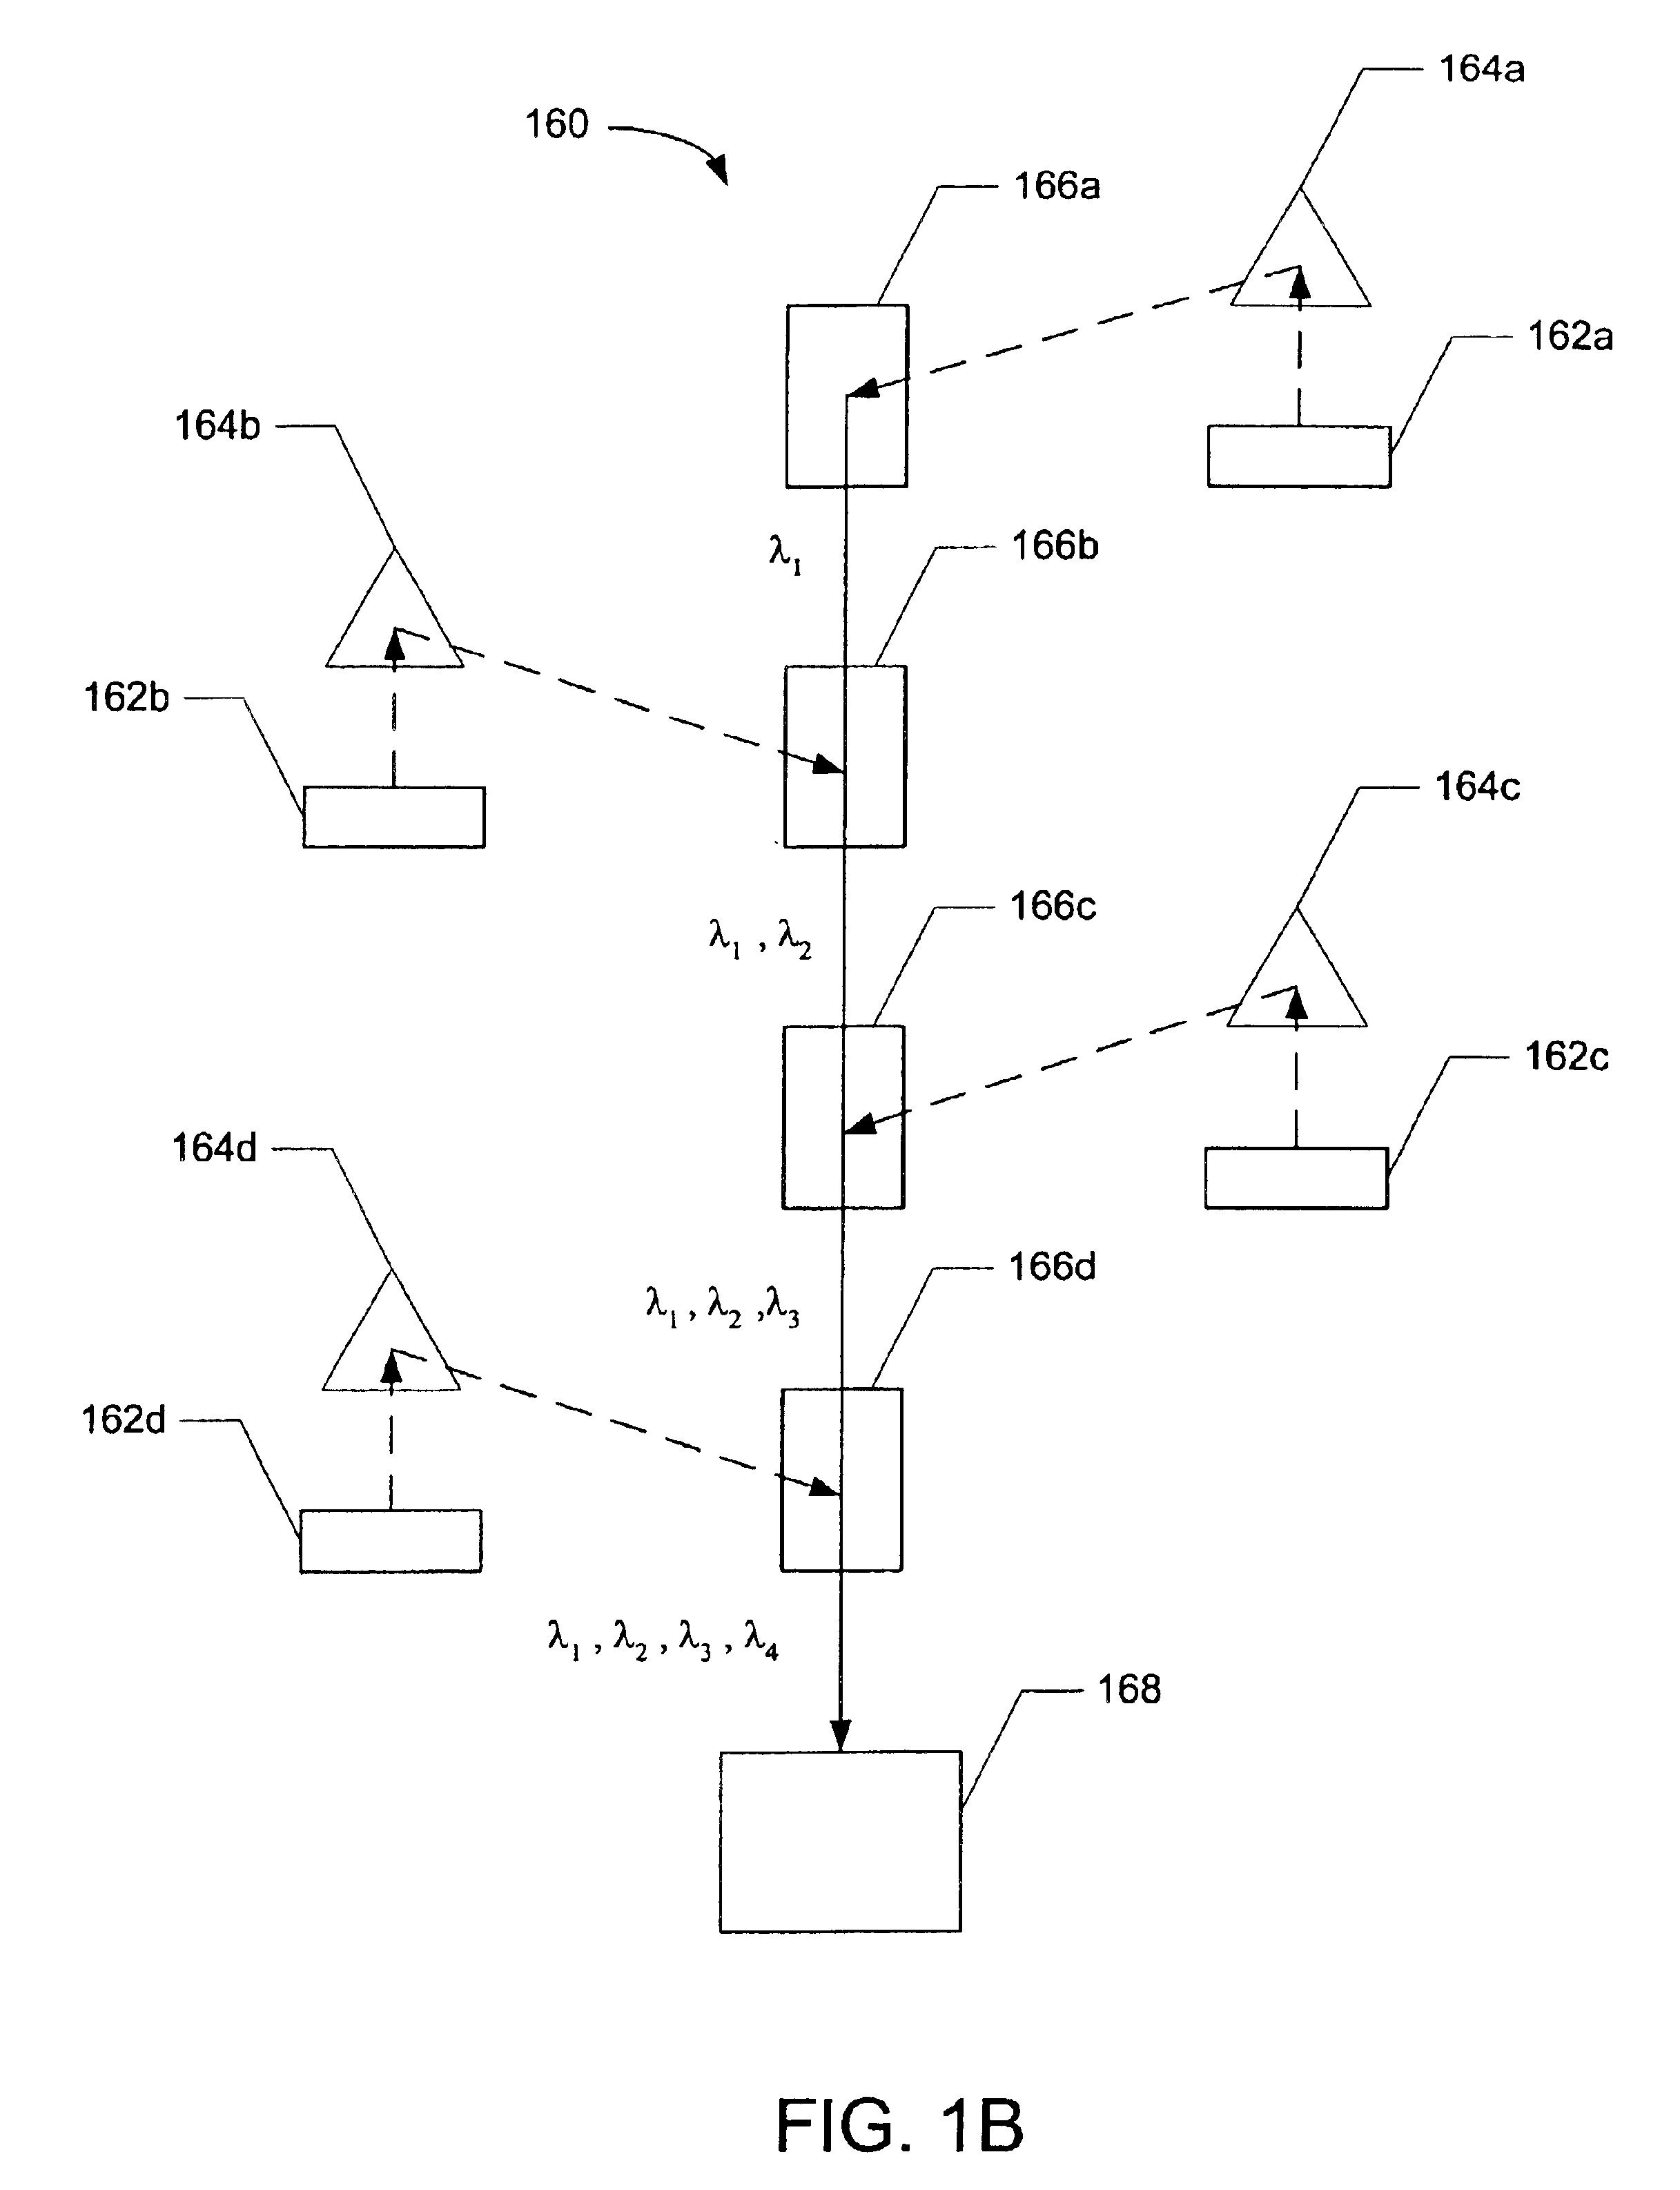 System and method for optical multiplexing and/or demultiplexing